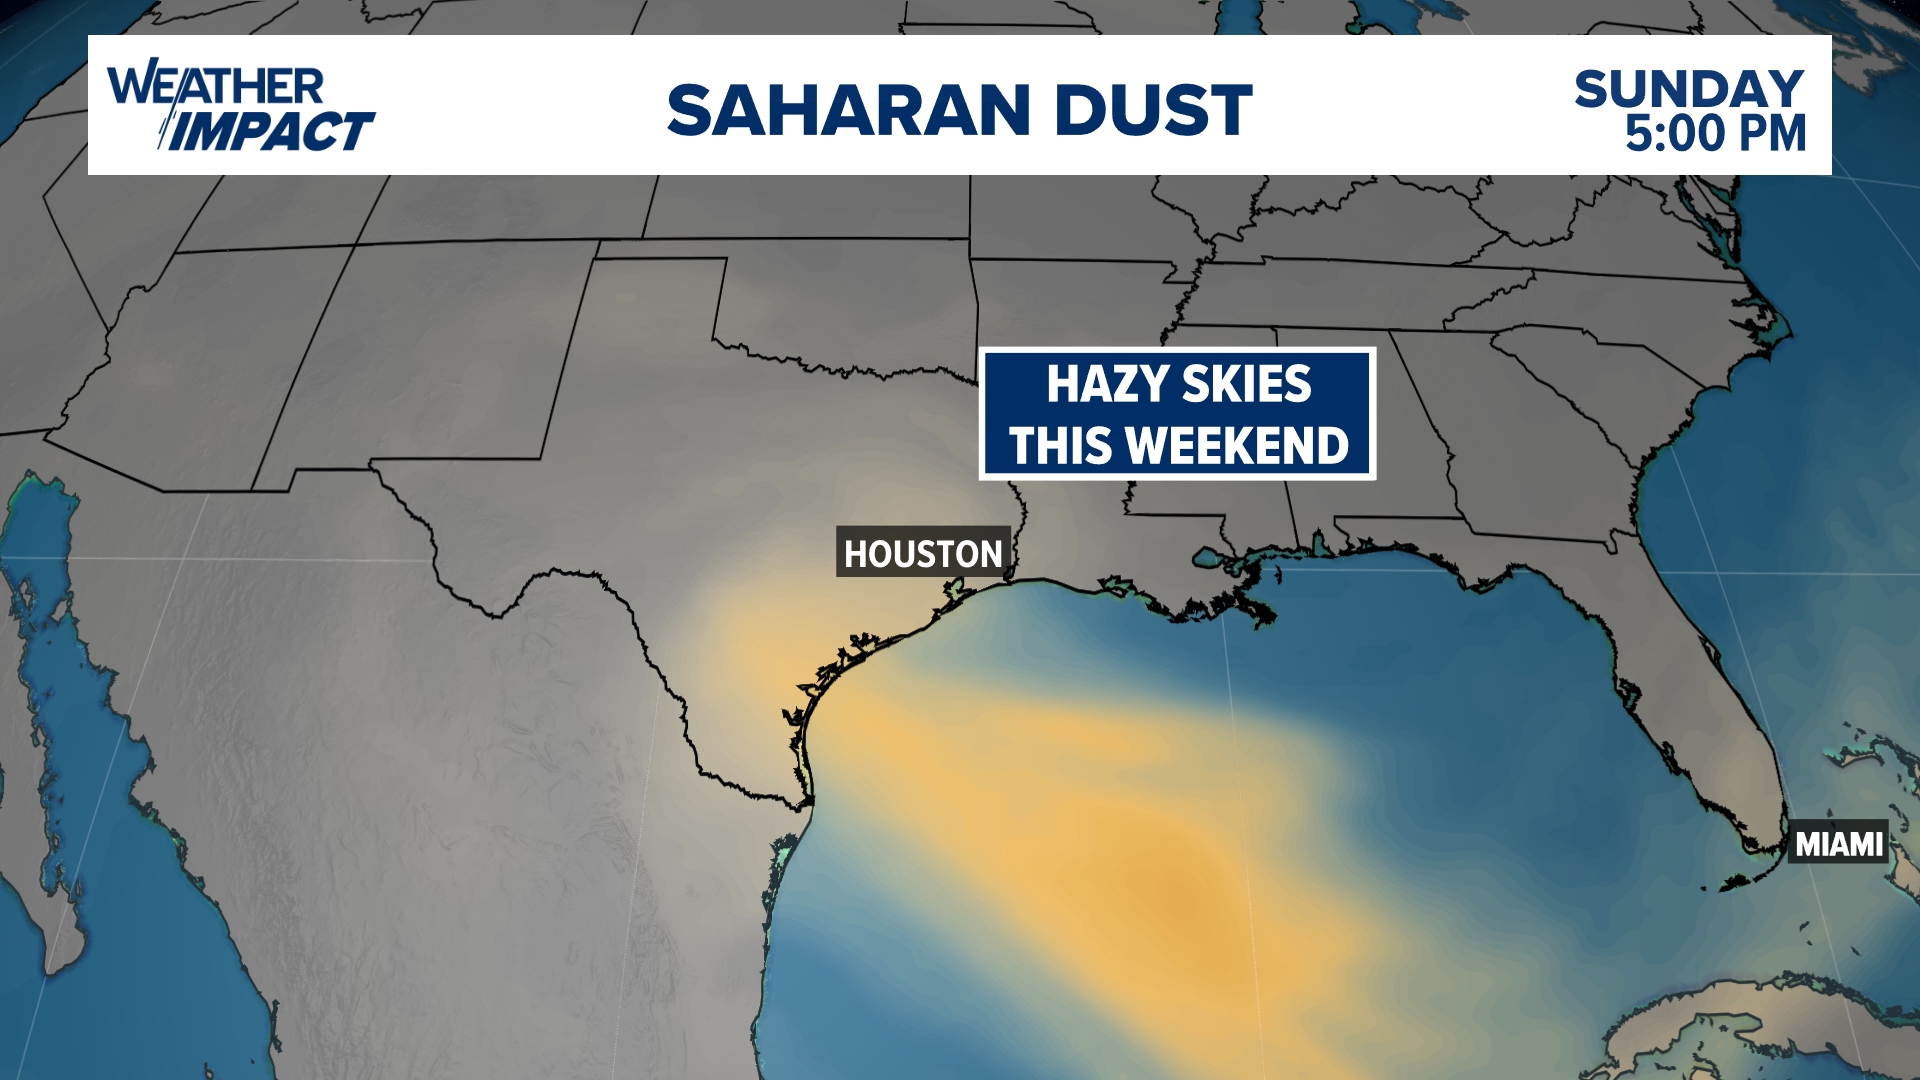 The dust could affect allergies and bring hazy skies.